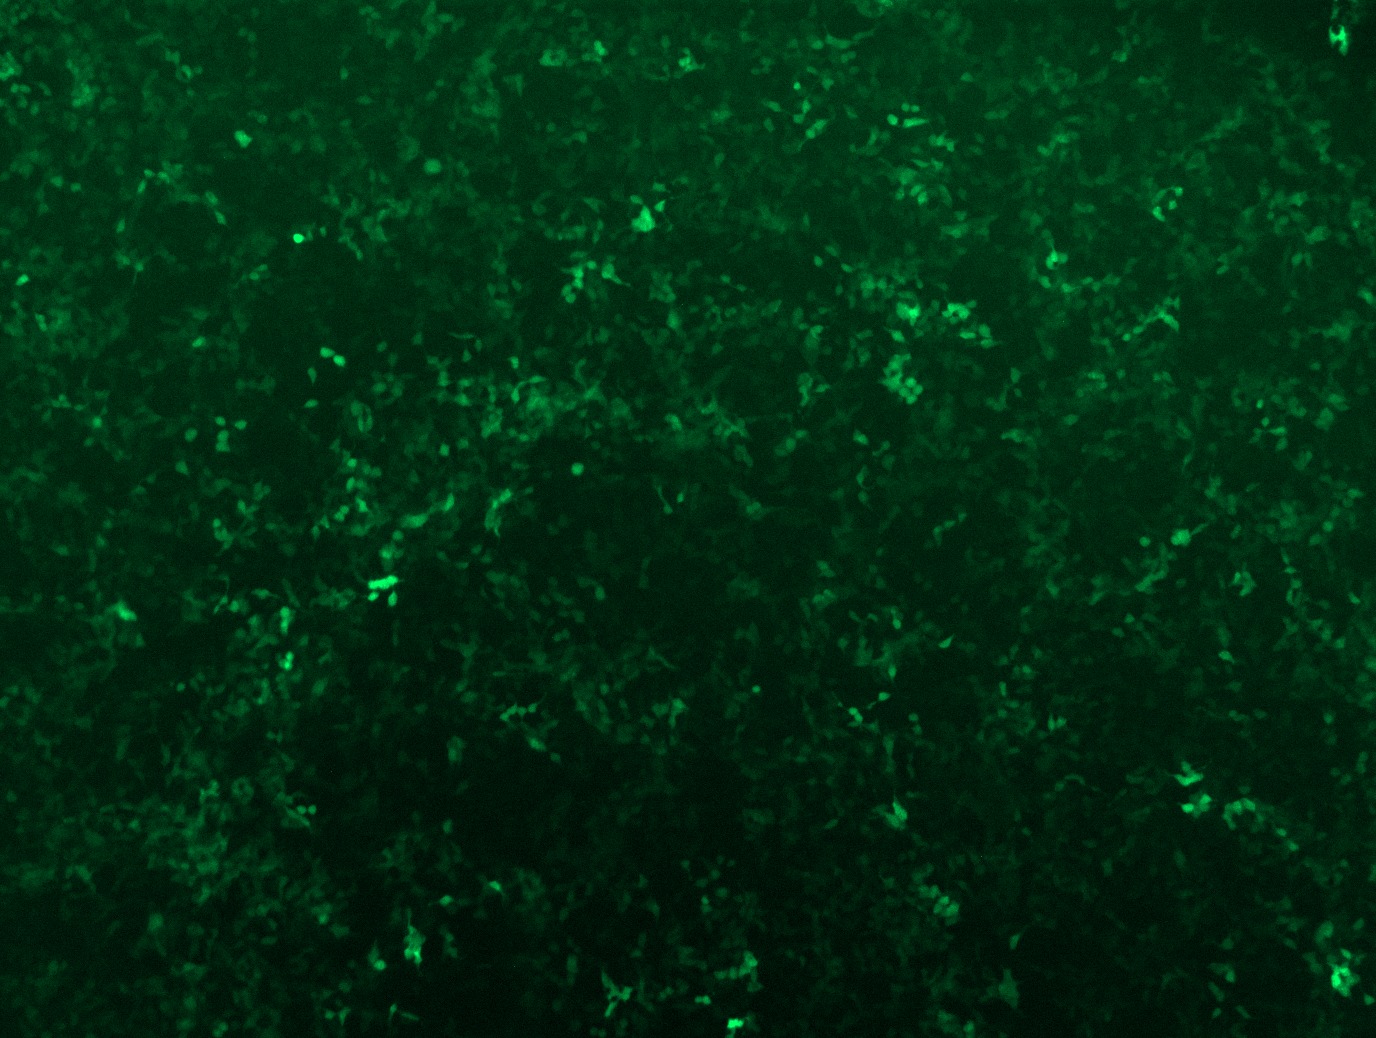 GFP signal was observed under microscope at 48 hours after transduction of TL305993A virus into HEK293 cells. TL305993A virus was prepared using lenti-shRNA TL305993A and TR30037 packaging kit.